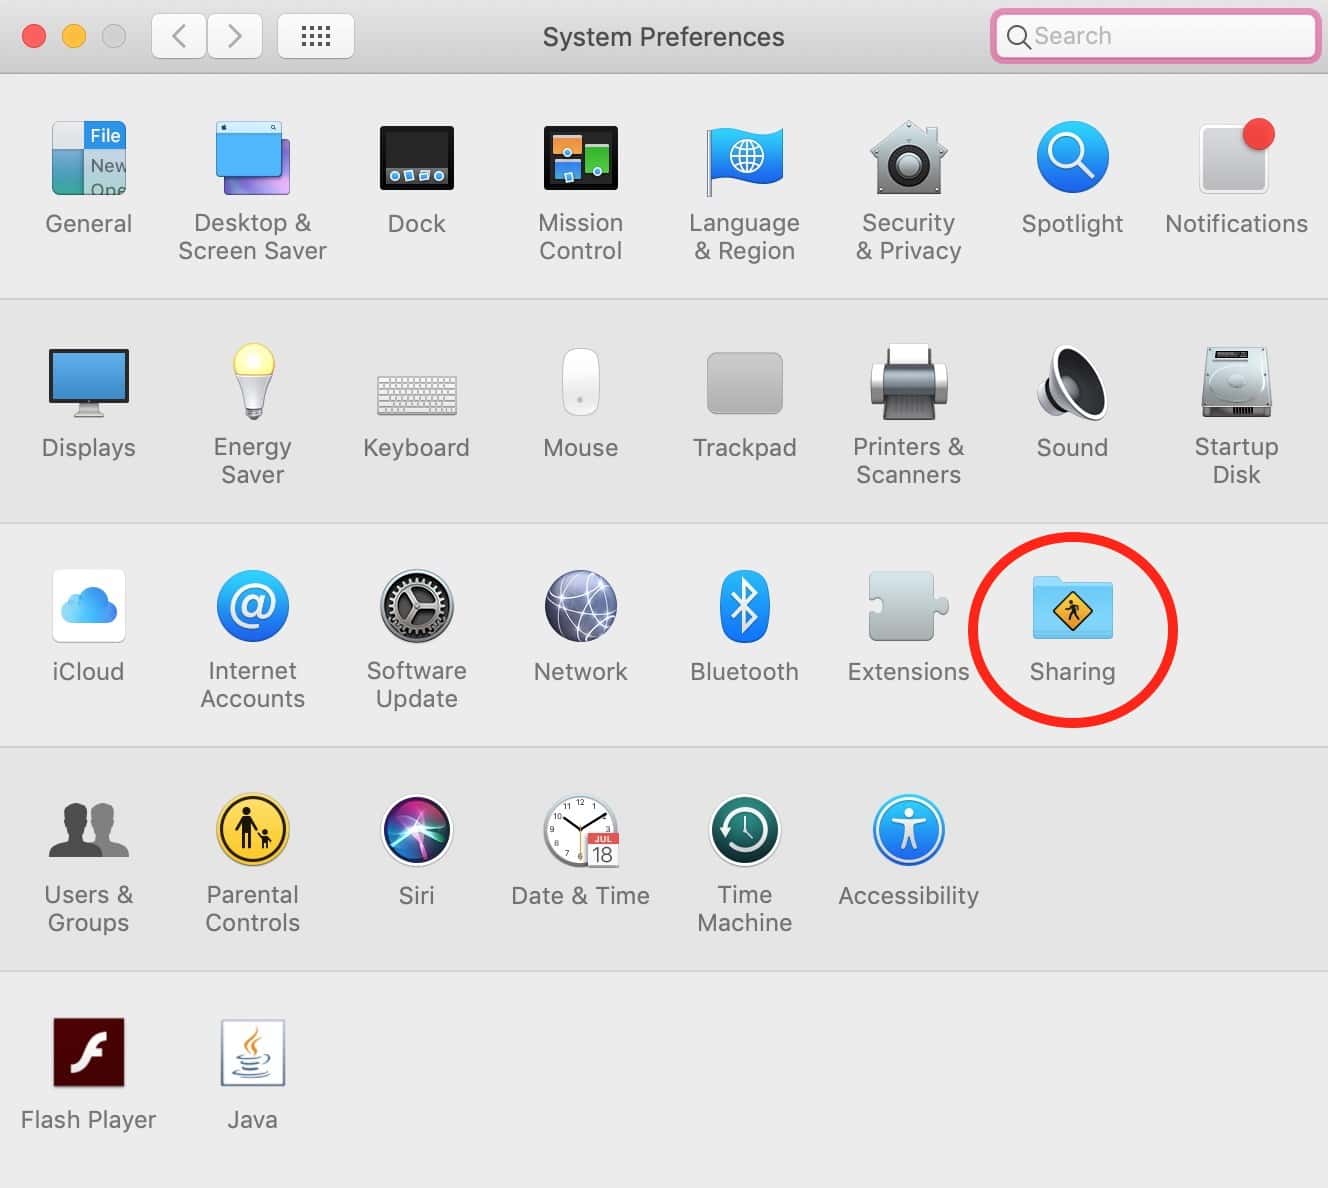 Sharing Pane of System Preferences